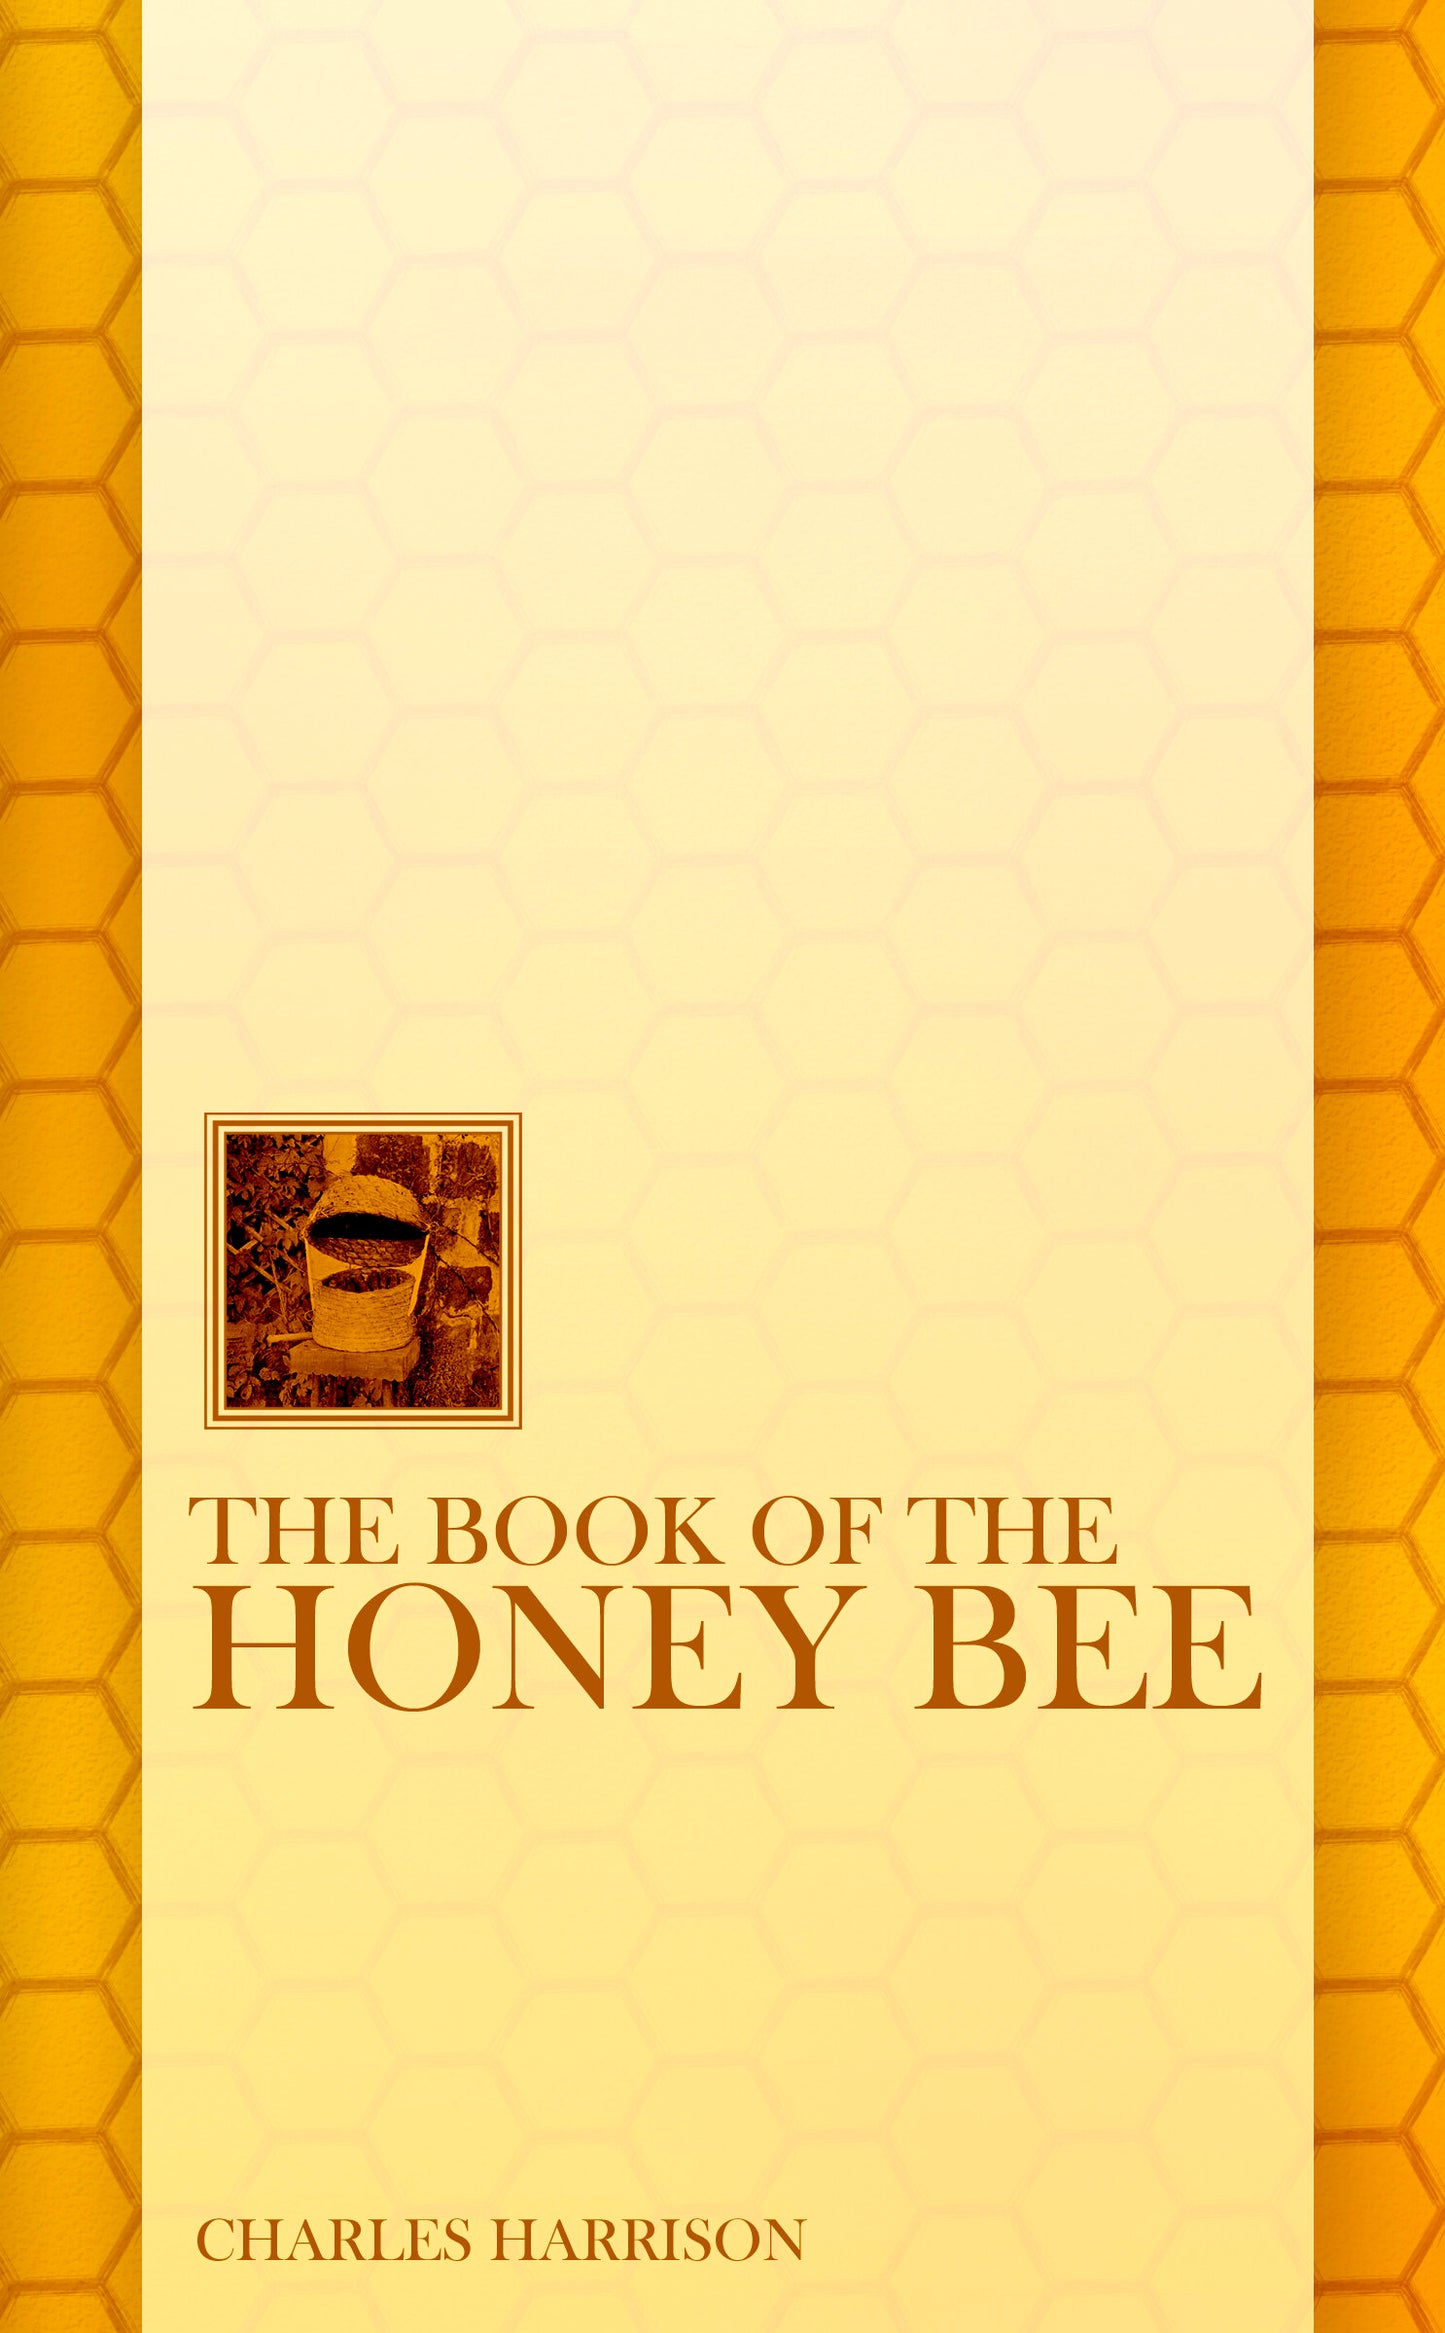 The Book of the Honey Bee